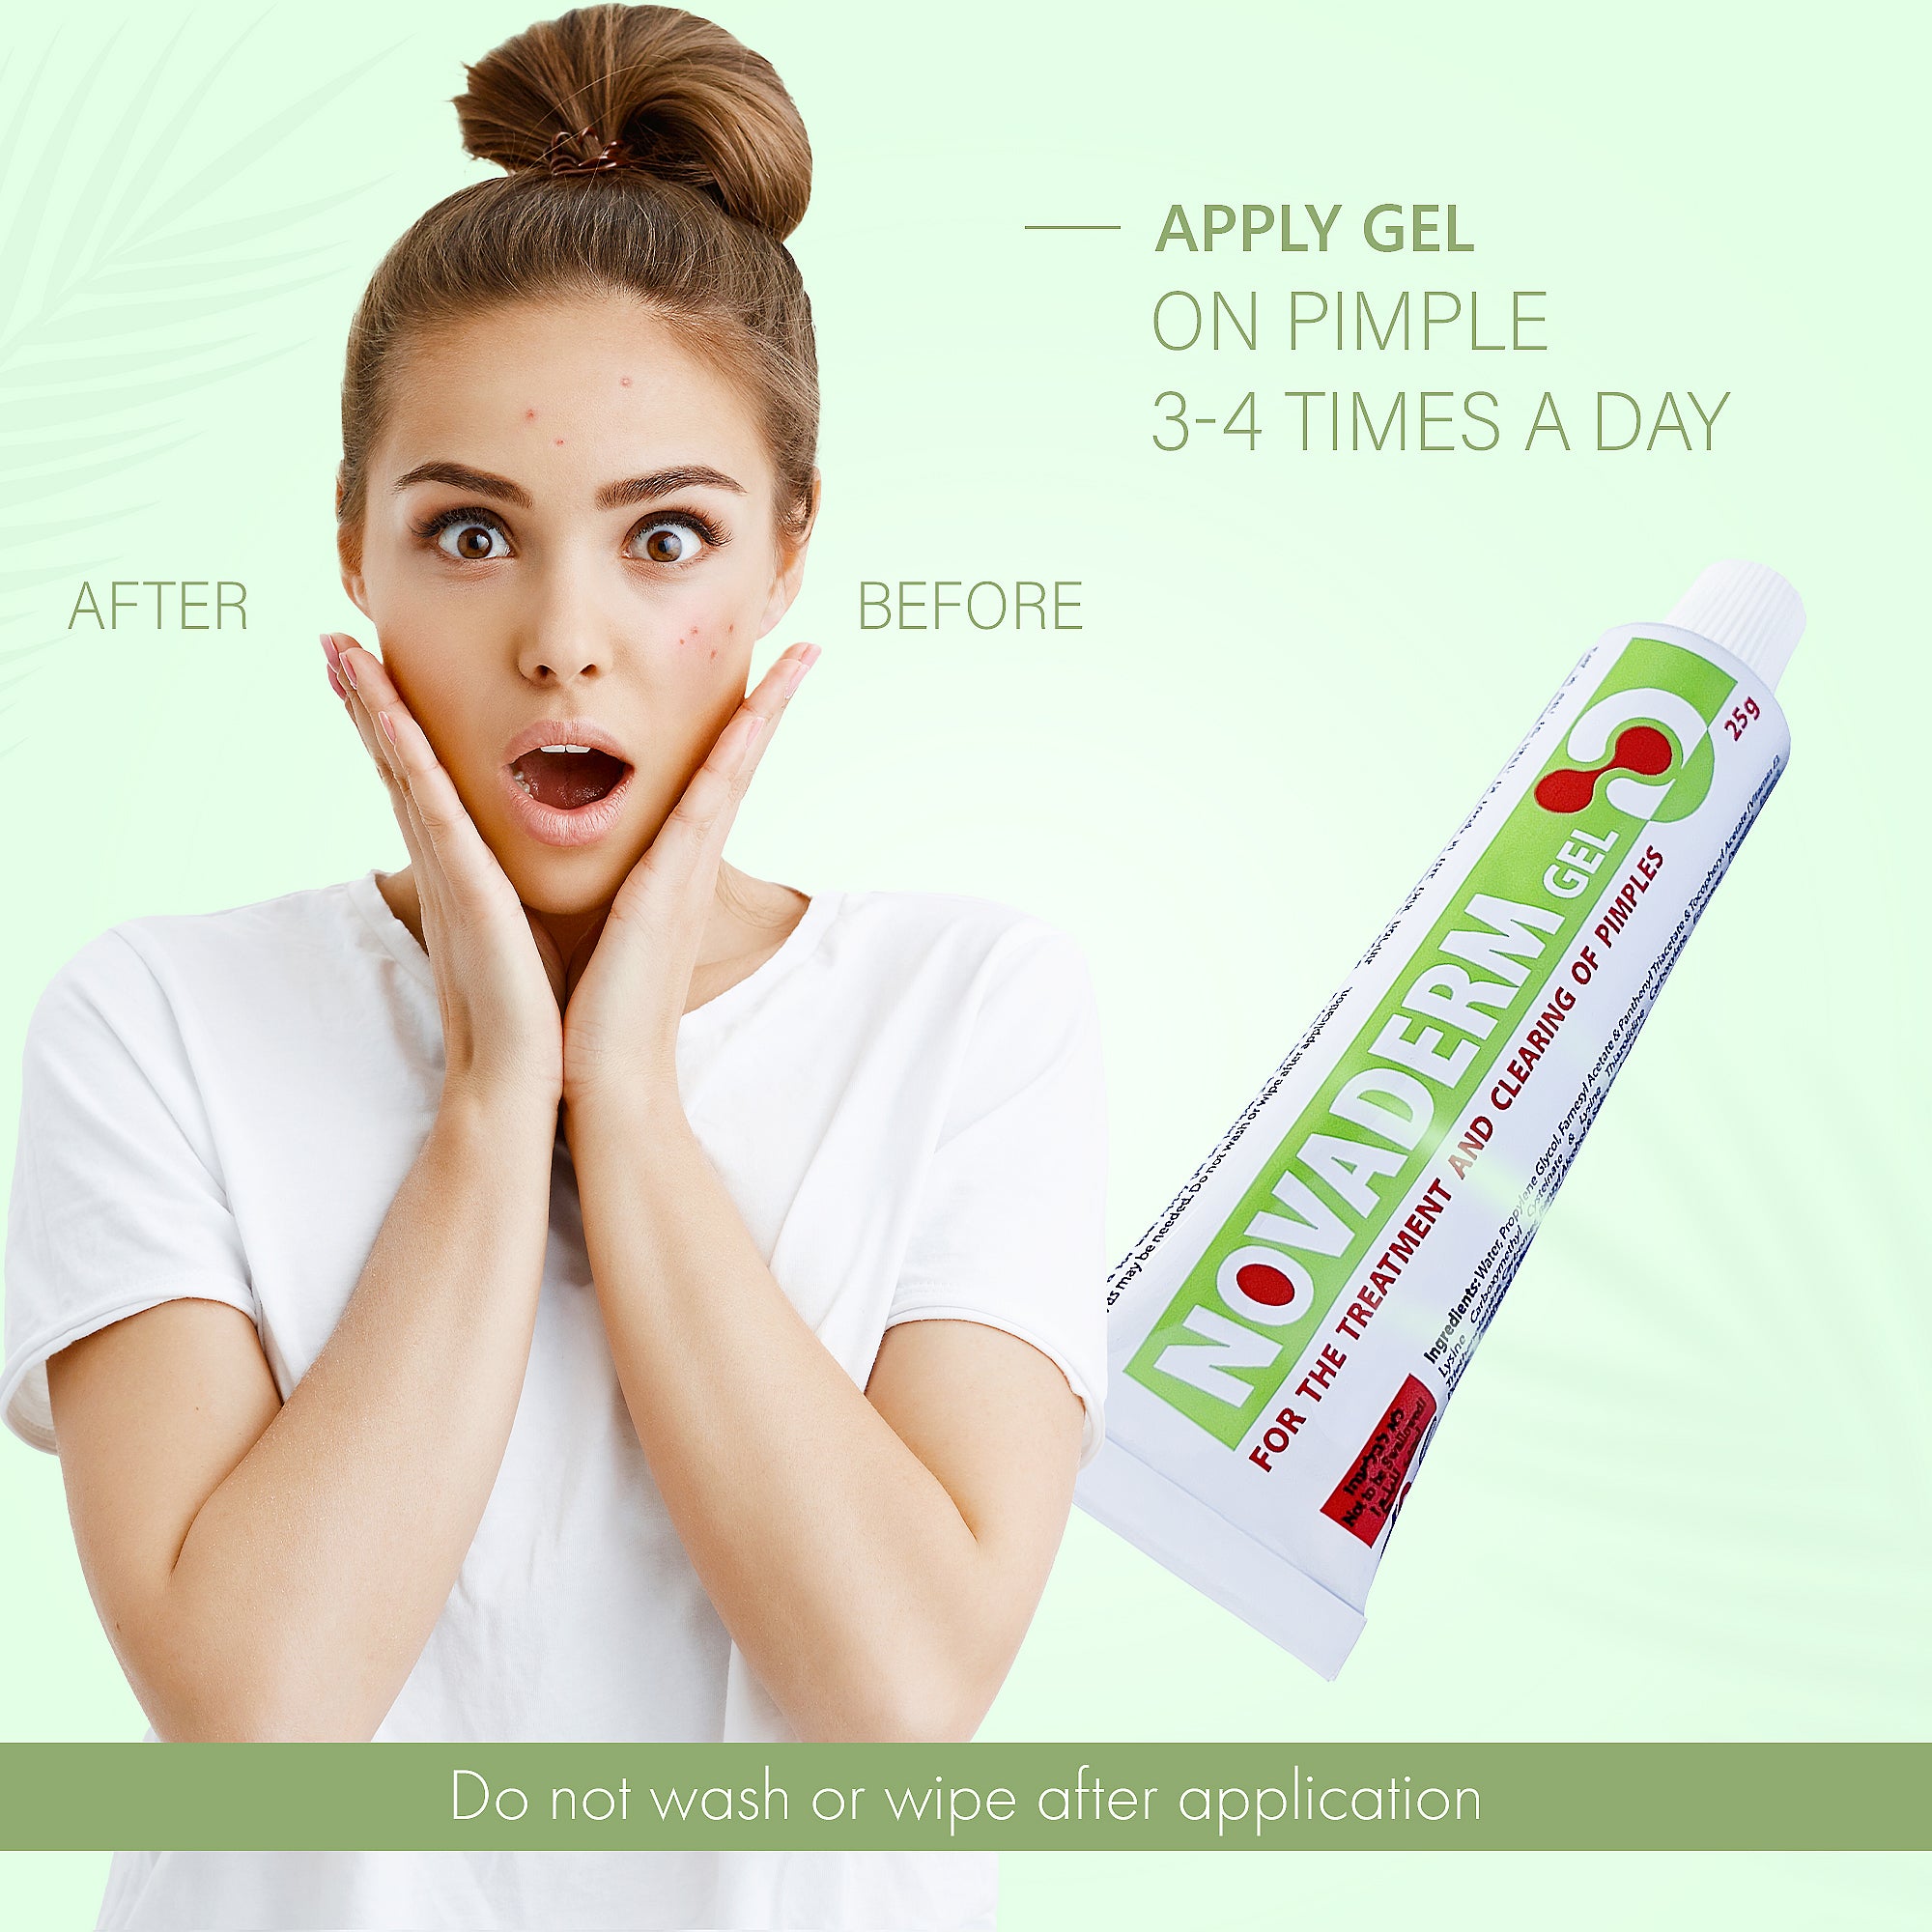 NovaDerm Gel for The Treatment and clearing of pimples. Acne Remedy for Removing Pimple and Cystic Acne 0.8oz